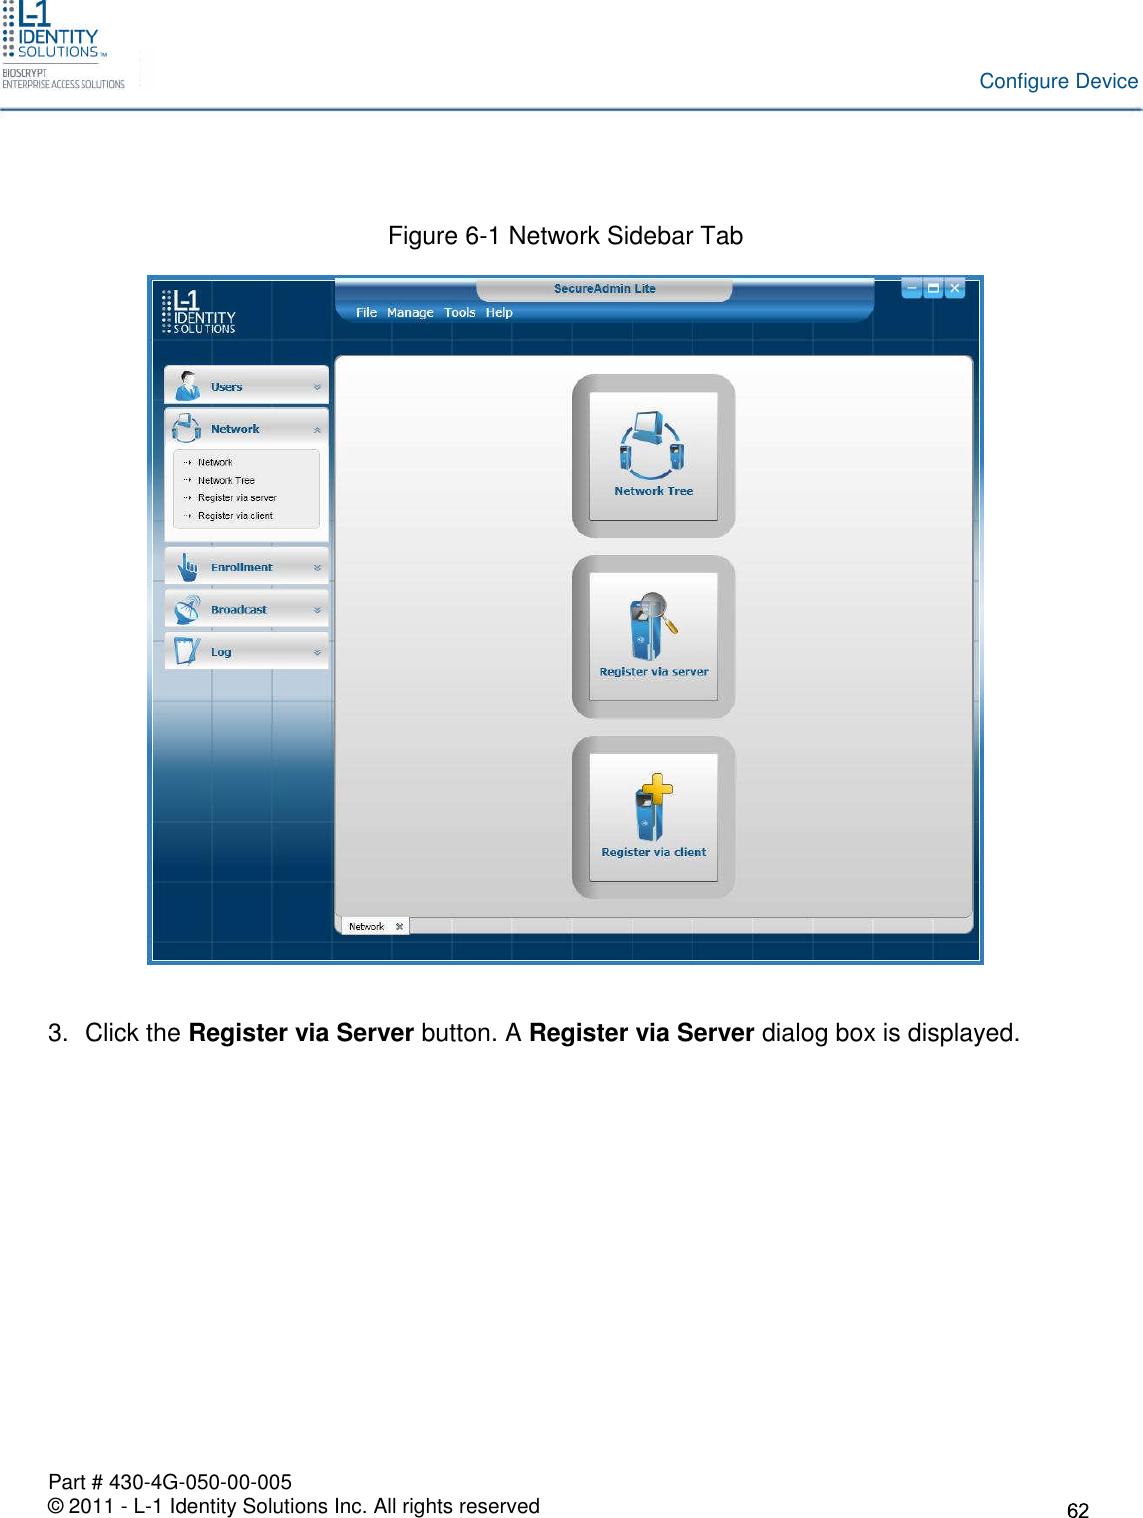 Part # 430-4G-050-00-005© 2011 - L-1 Identity Solutions Inc. All rights reservedConfigure DeviceFigure 6-1 Network Sidebar Tab3. Click the Register via Server button. A Register via Server dialog box is displayed.